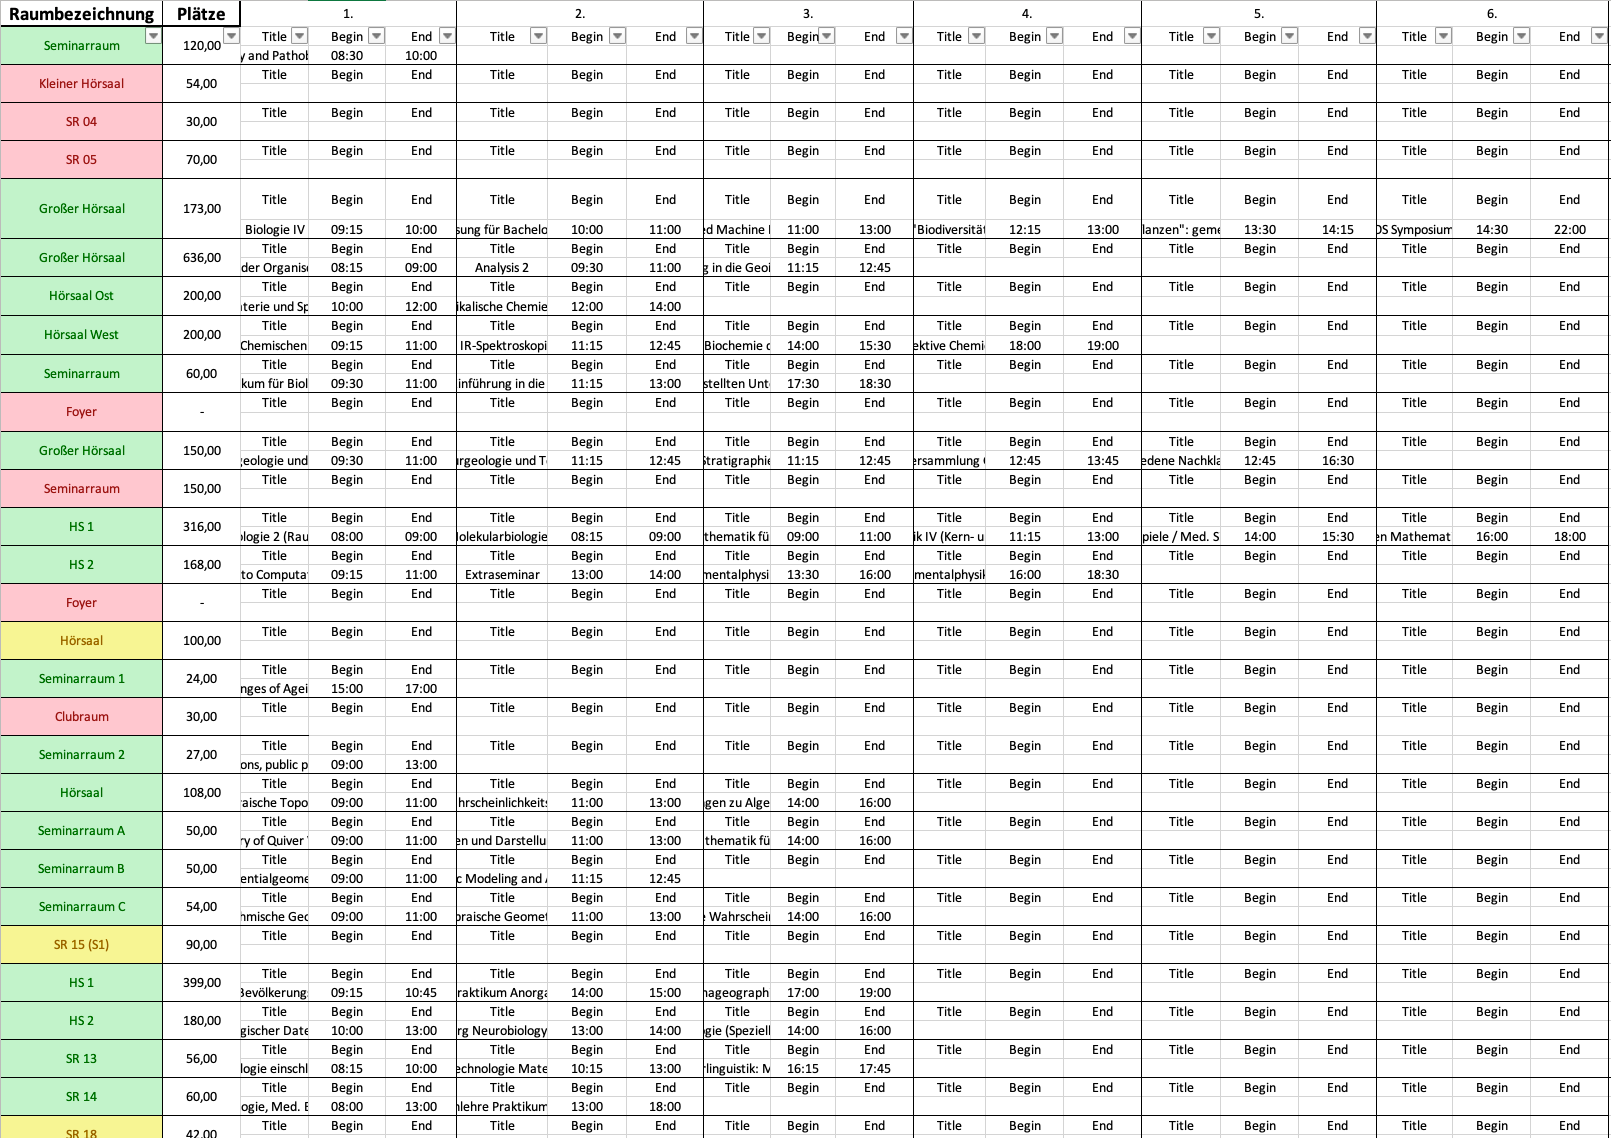 One section of our spreadsheet